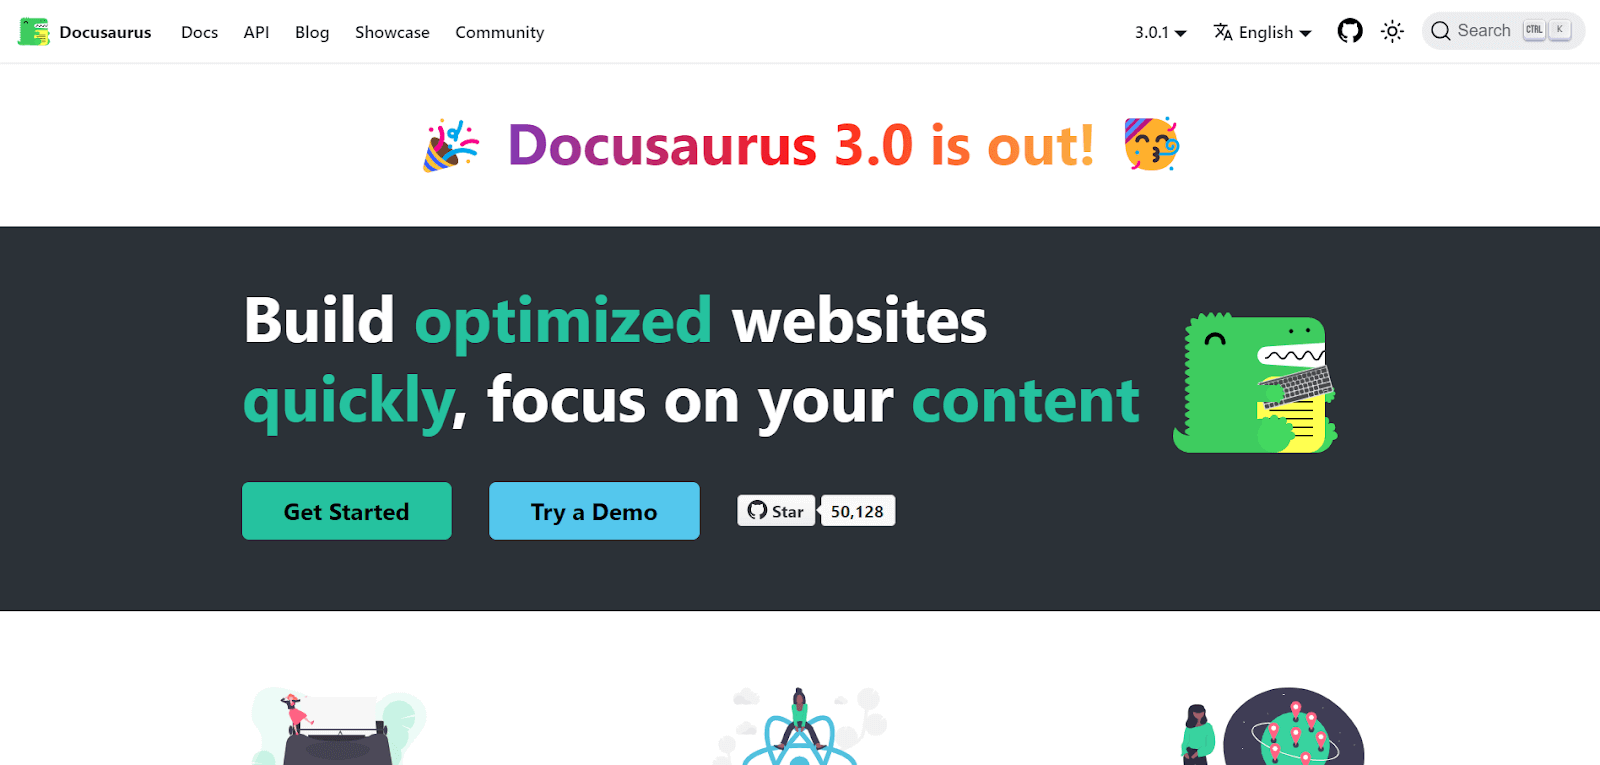 Docusaurus is yet another one of the top static site generators